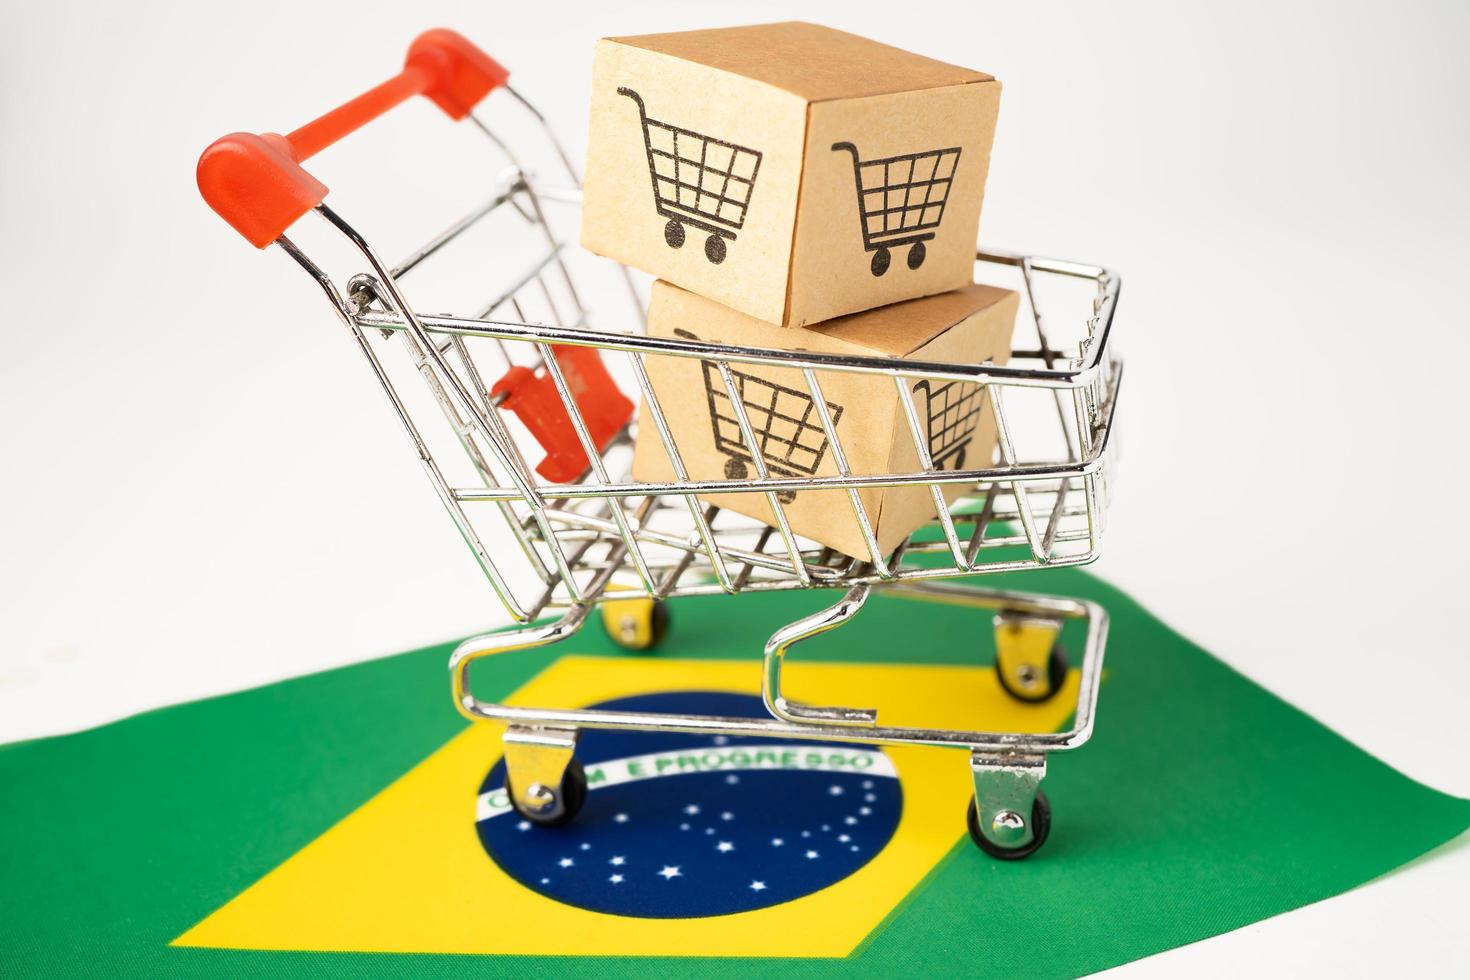 Box with shopping cart logo and Brazil flag, Import Export Shopping online or eCommerce finance delivery service store product shipping, trade, supplier concept. photo